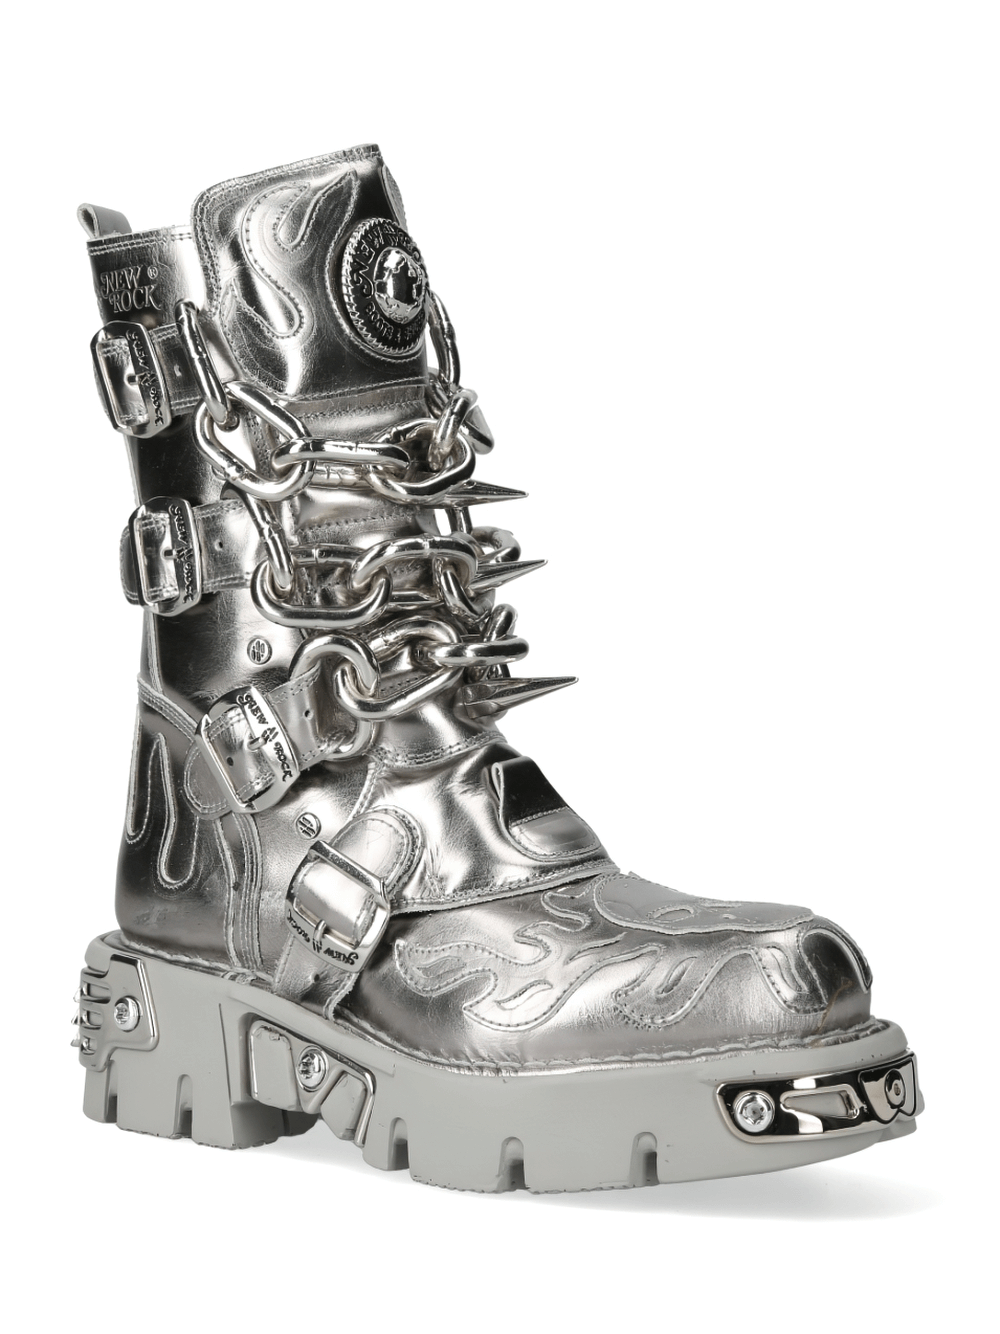 NEW ROCK Silver Metallic Chain Boots for Punk Fashion